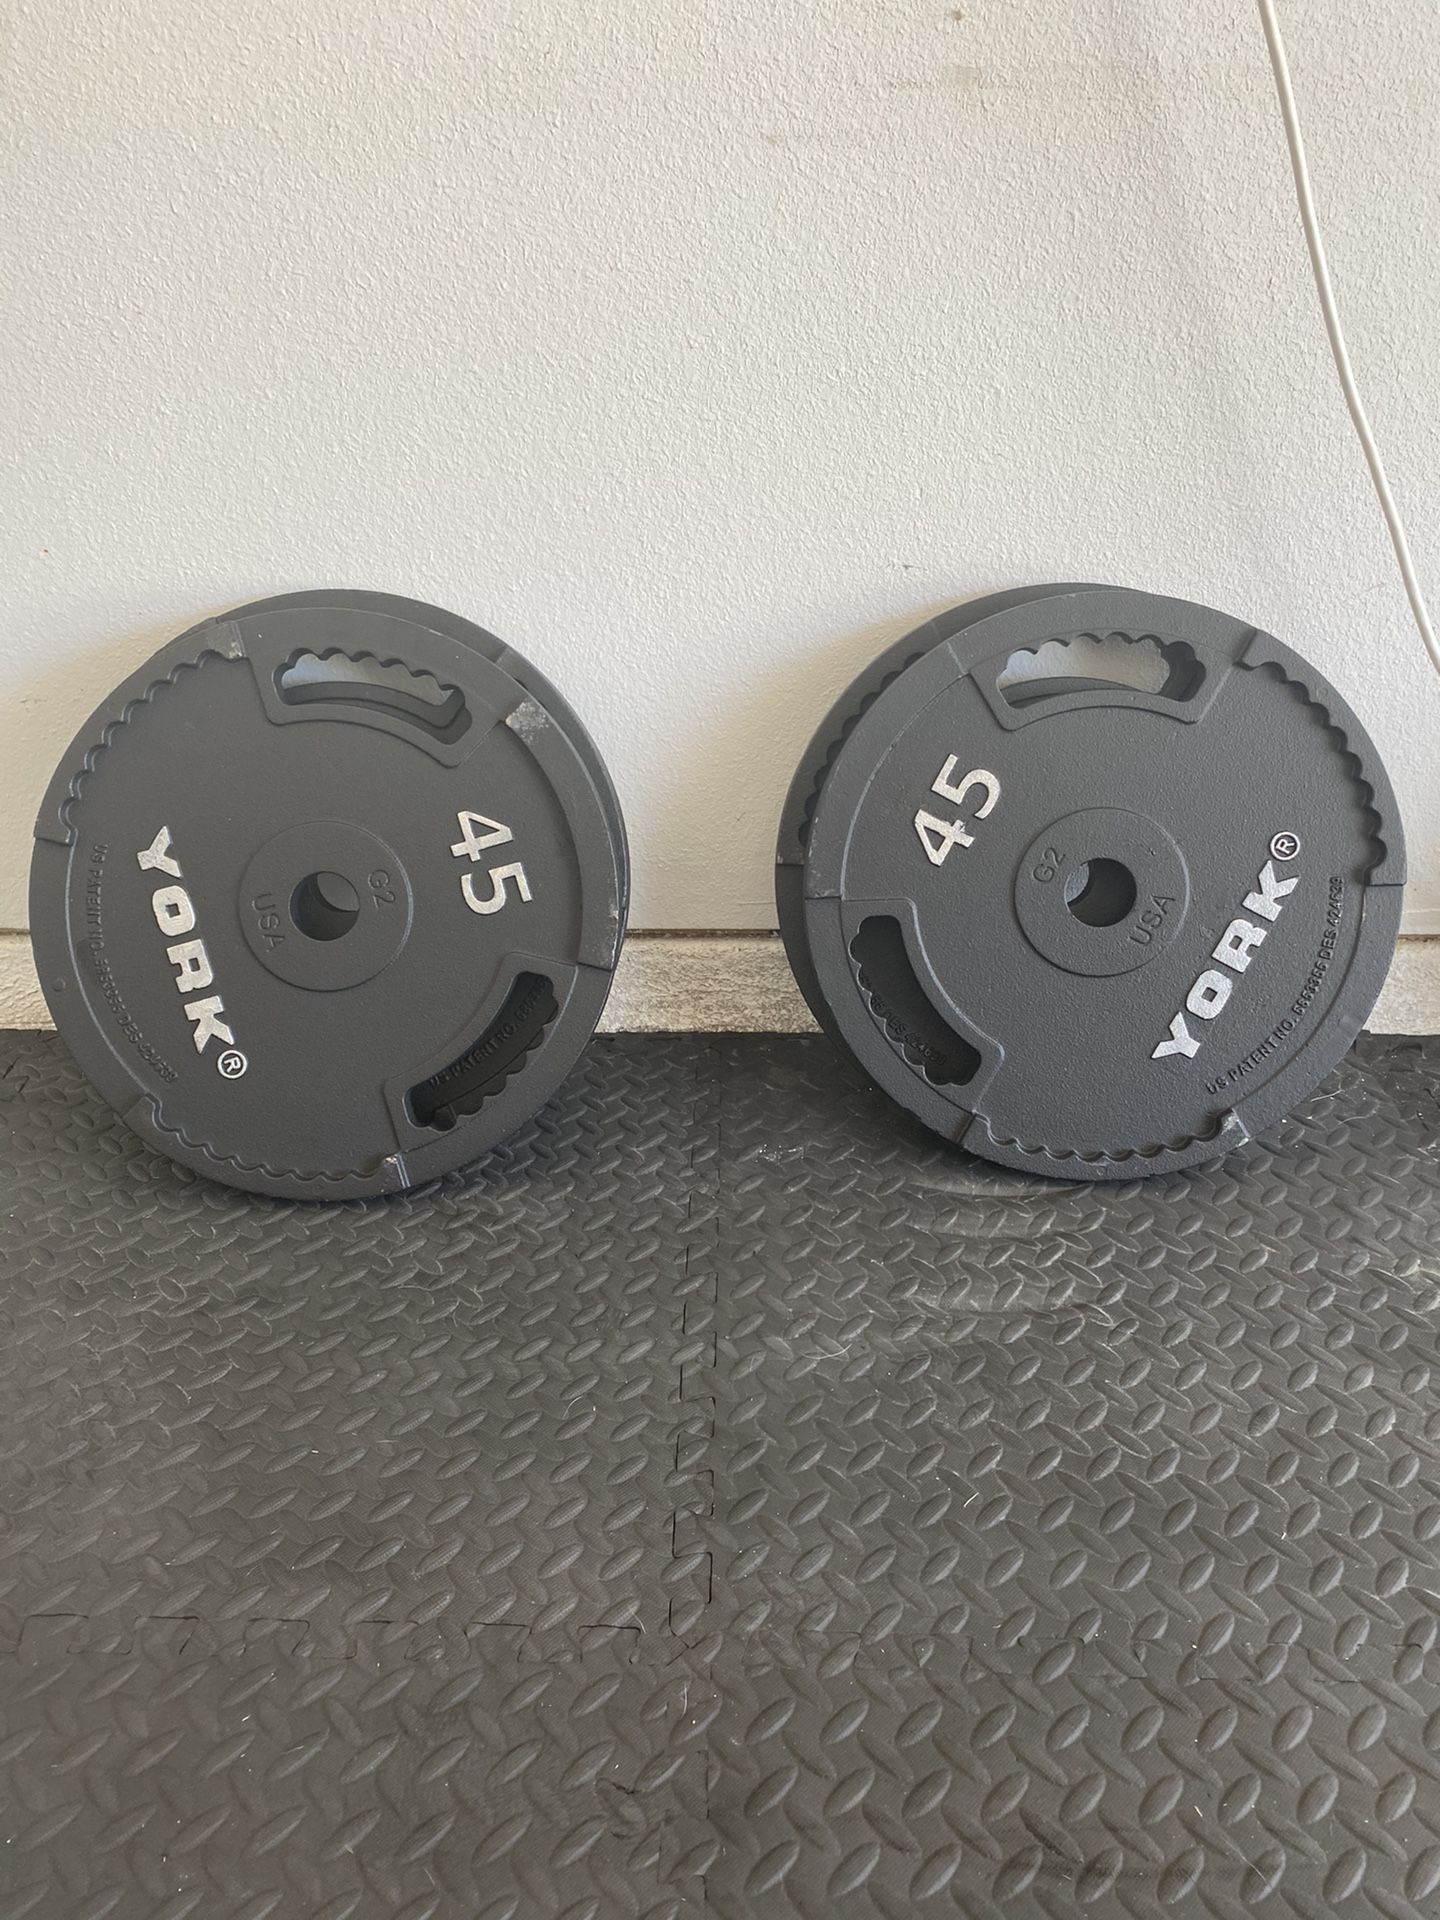 2 pairs of Iron 45lb plates! 180LBs total!